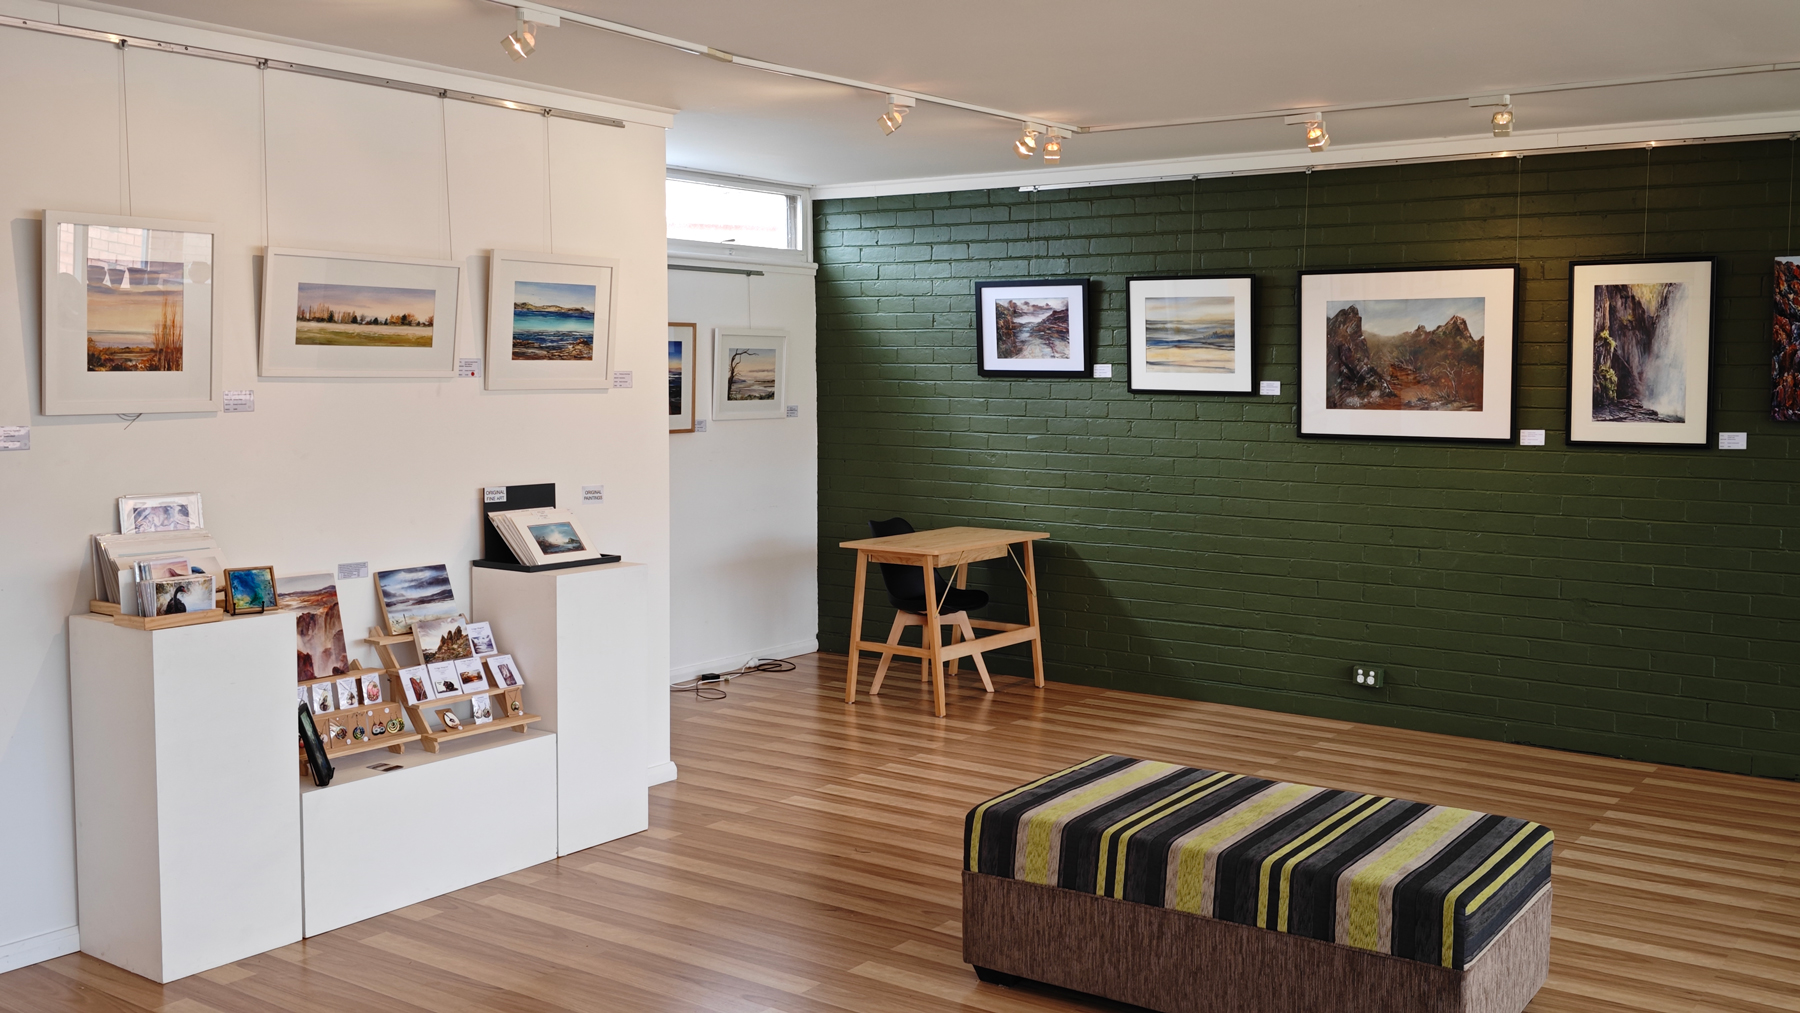 Image show the inside of the Poatina art gallery walls as part of their story Exhibition news The Inspiring Poatina Tree Art Gallery Winter Exhibitions Art Trails Tasmania as part of their Artists Ensemble membership